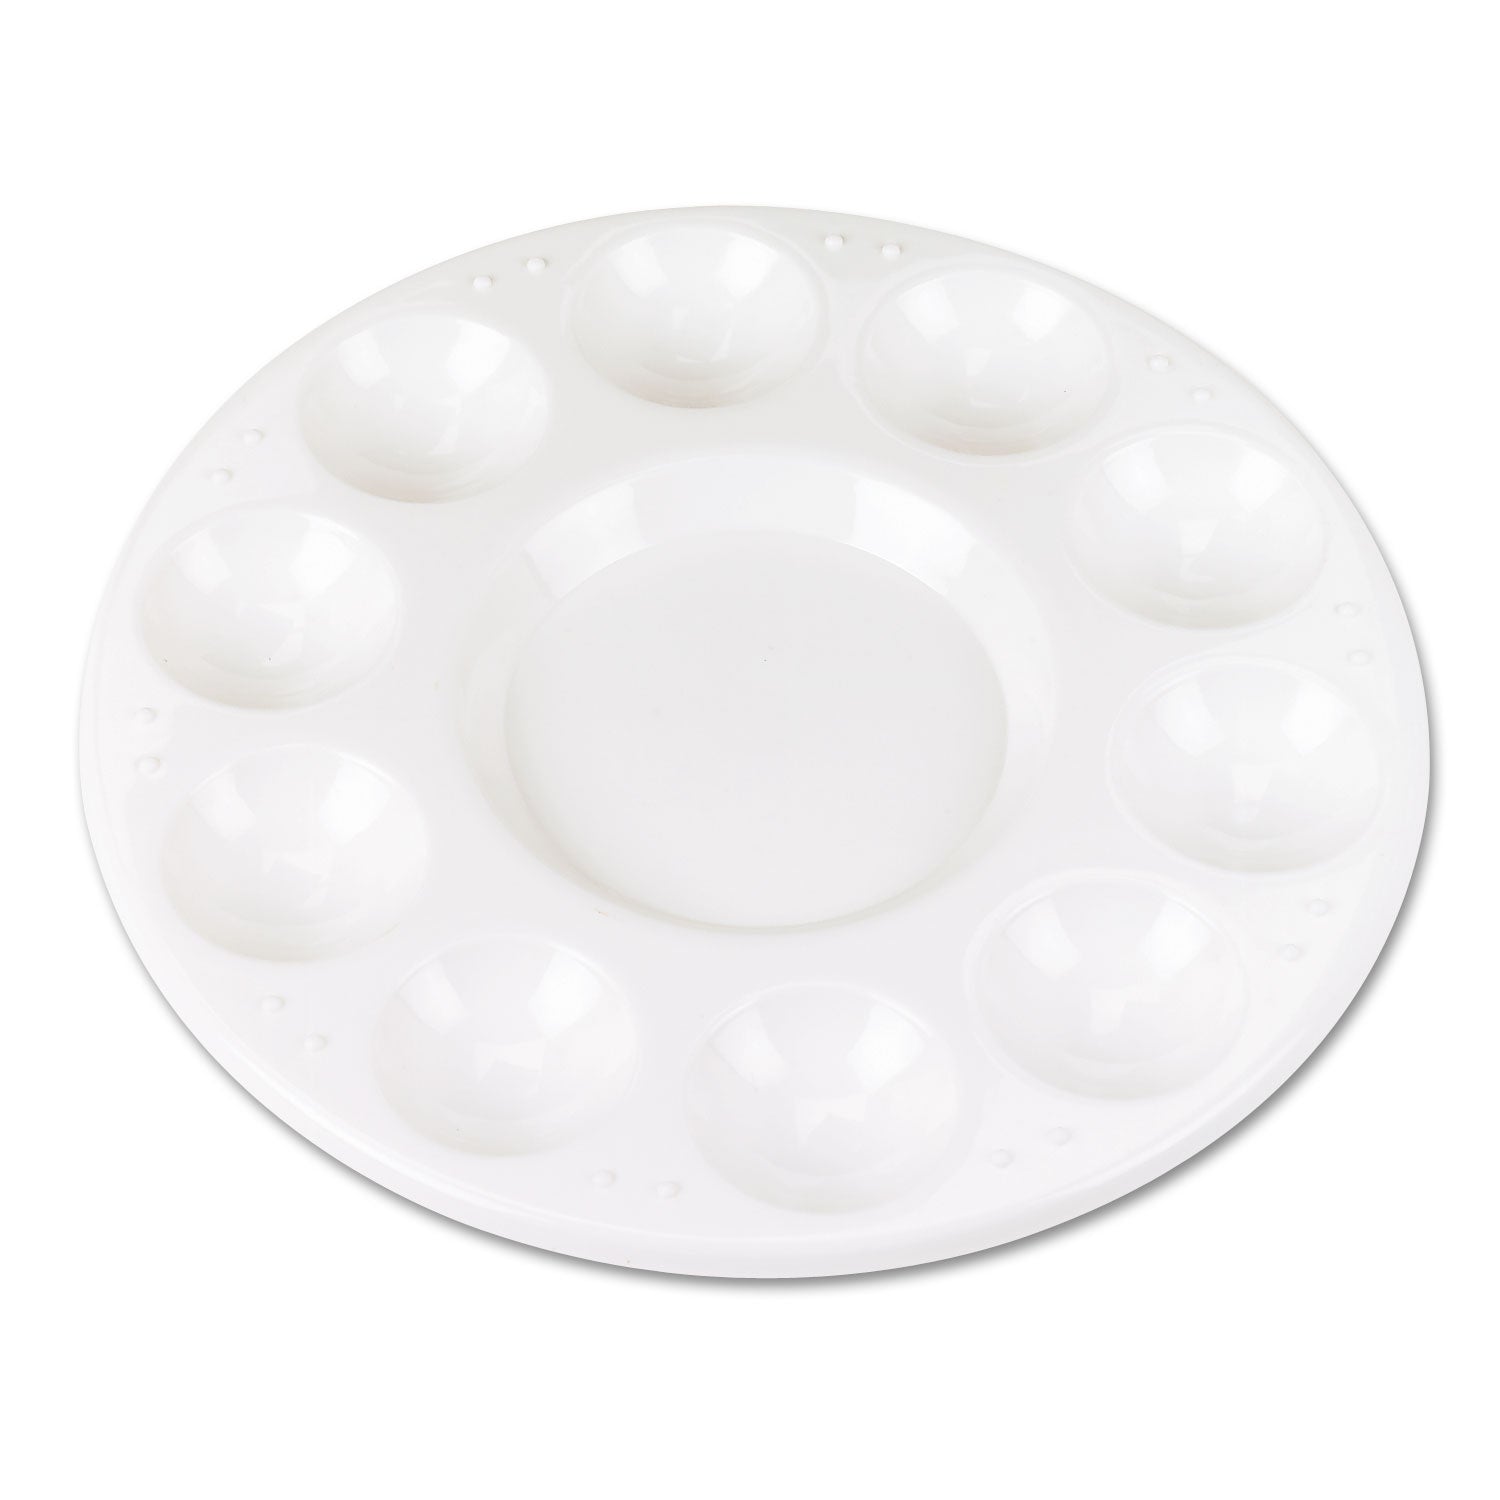 Round Plastic Paint Trays for Classroom, White, 10/Pack - 